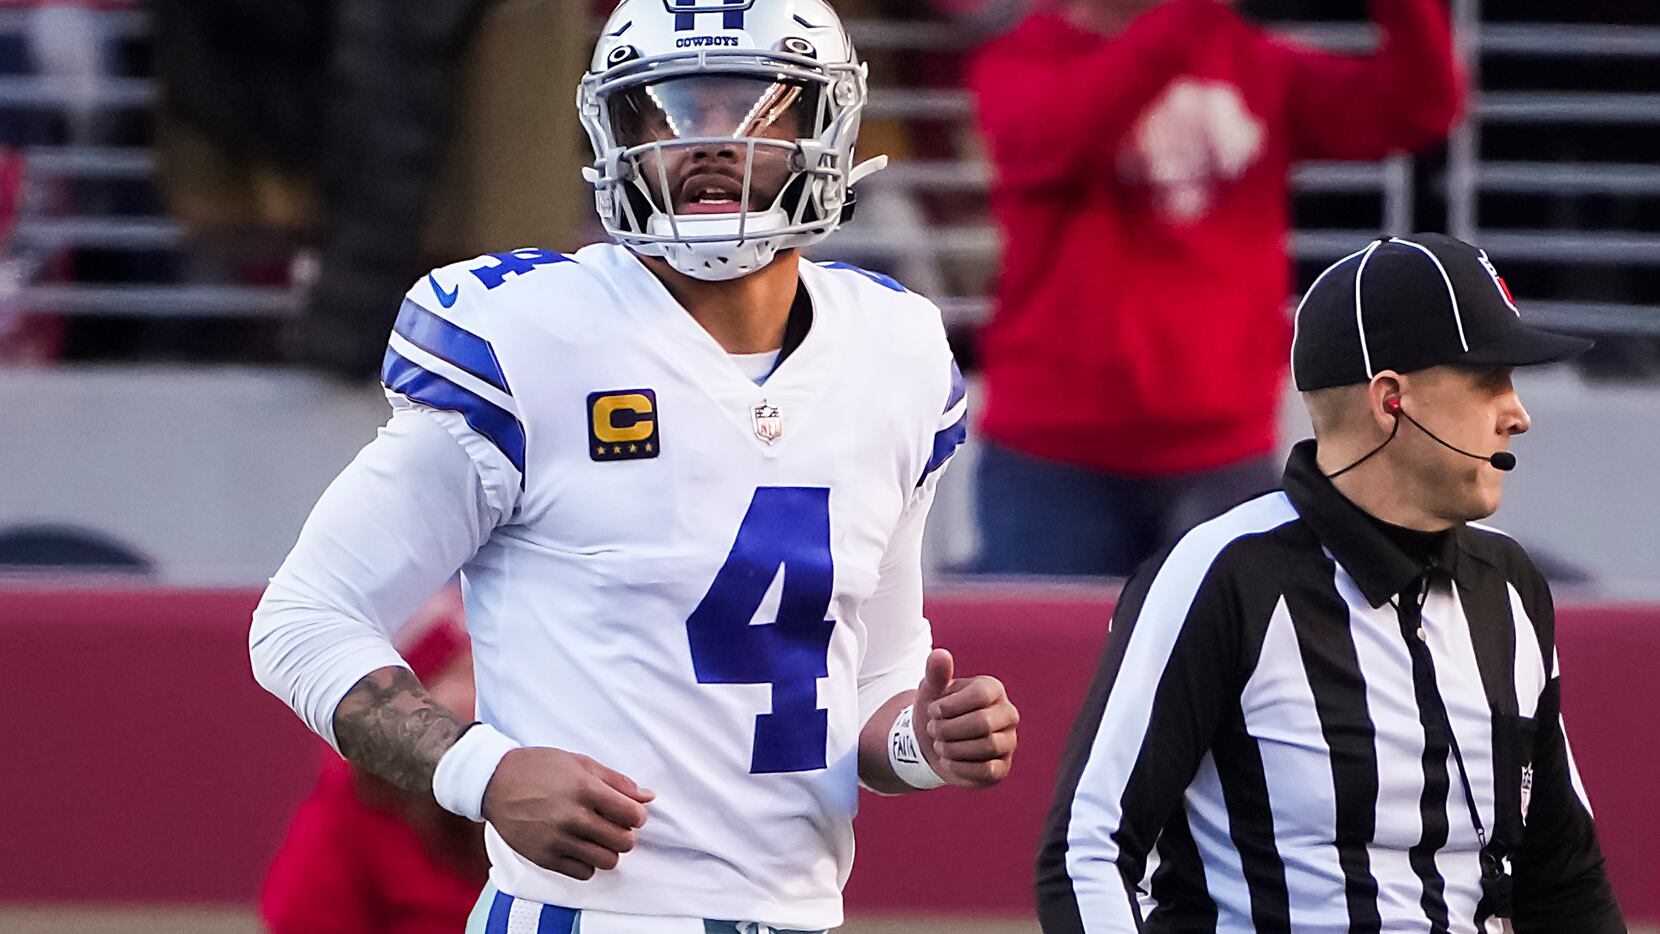 5 takeaways from Cowboys-49ers: The NFC Championship drought continues